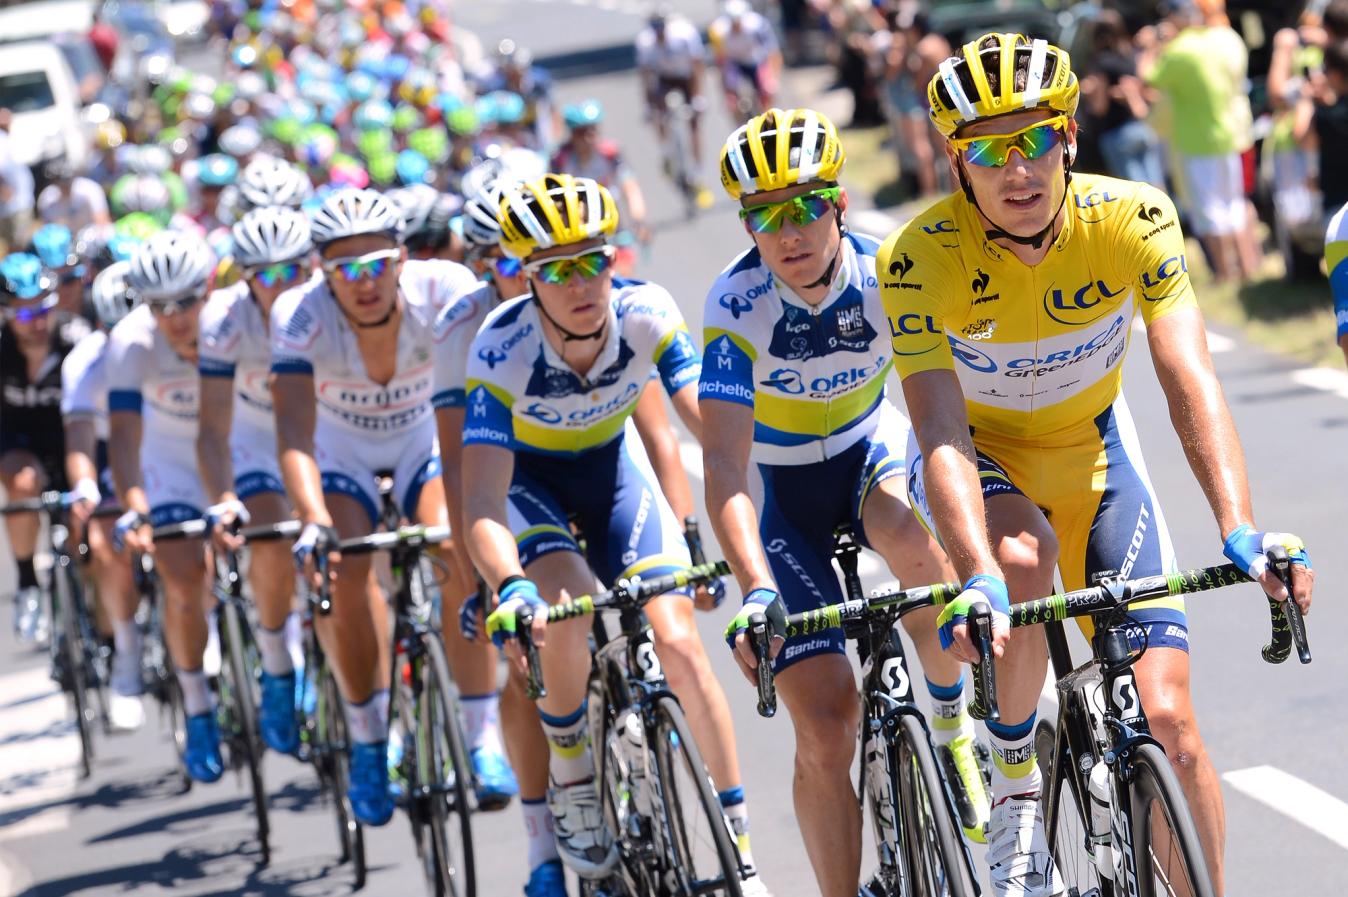 Impey wearing the yellow jersey in the 2013 Tour de France for Orica GreenEdge